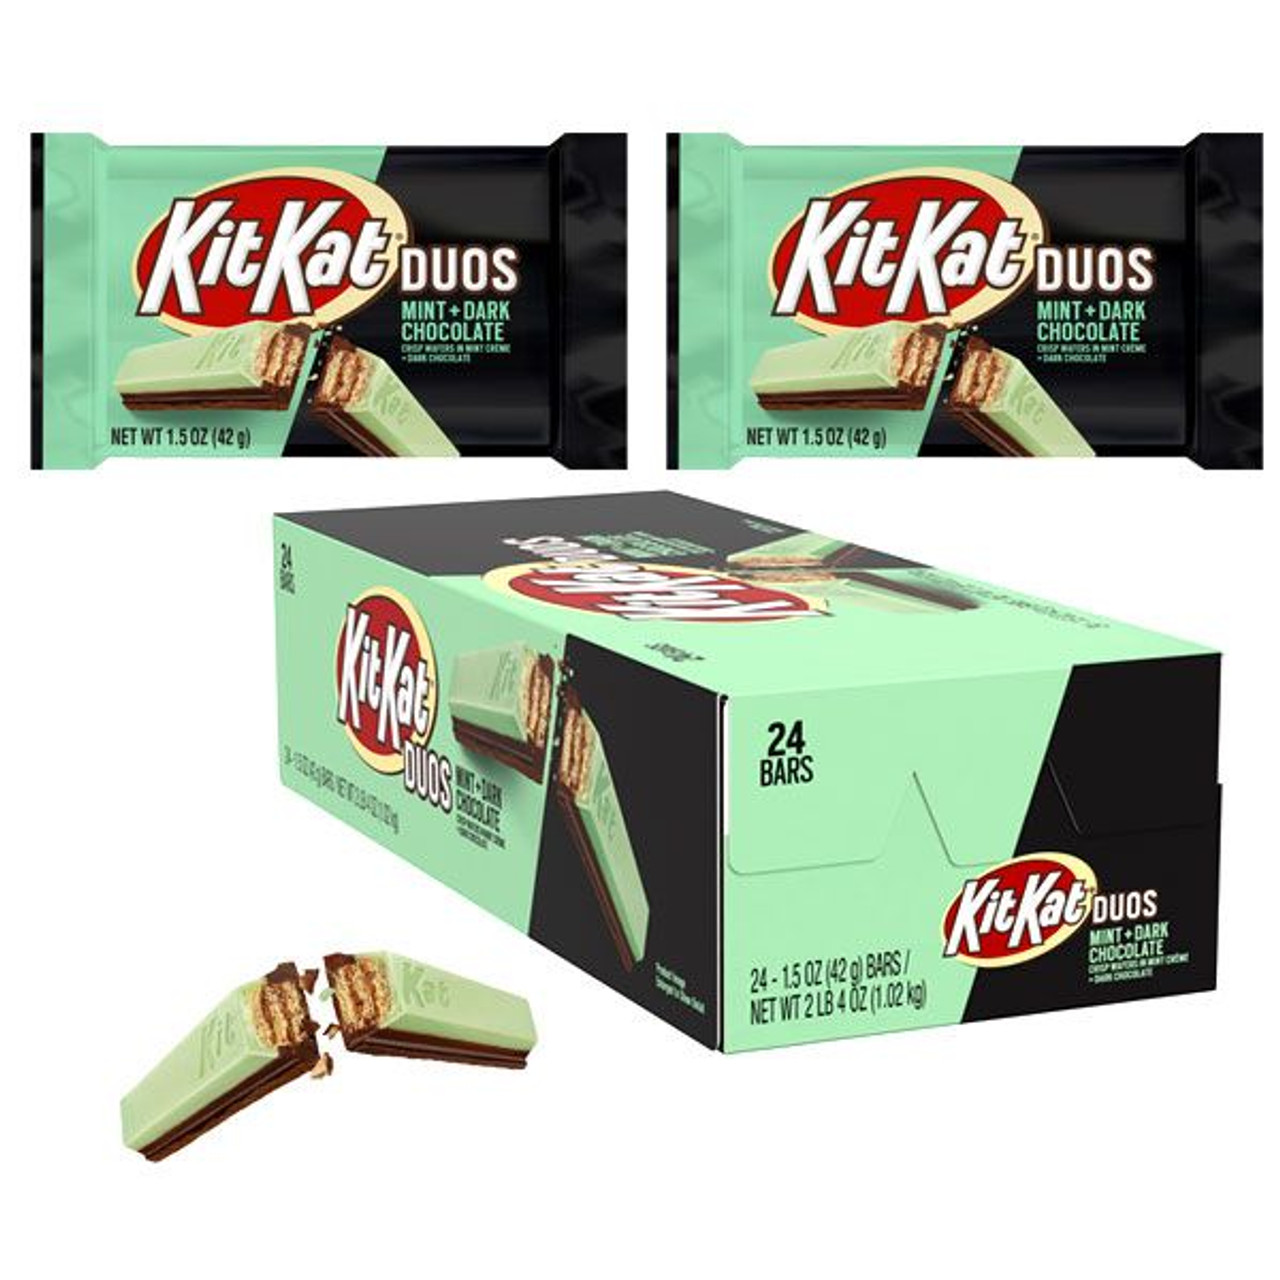 Kit Kat Duos Strawberry and Dark Chocolate (Limited Edition) - 1.5